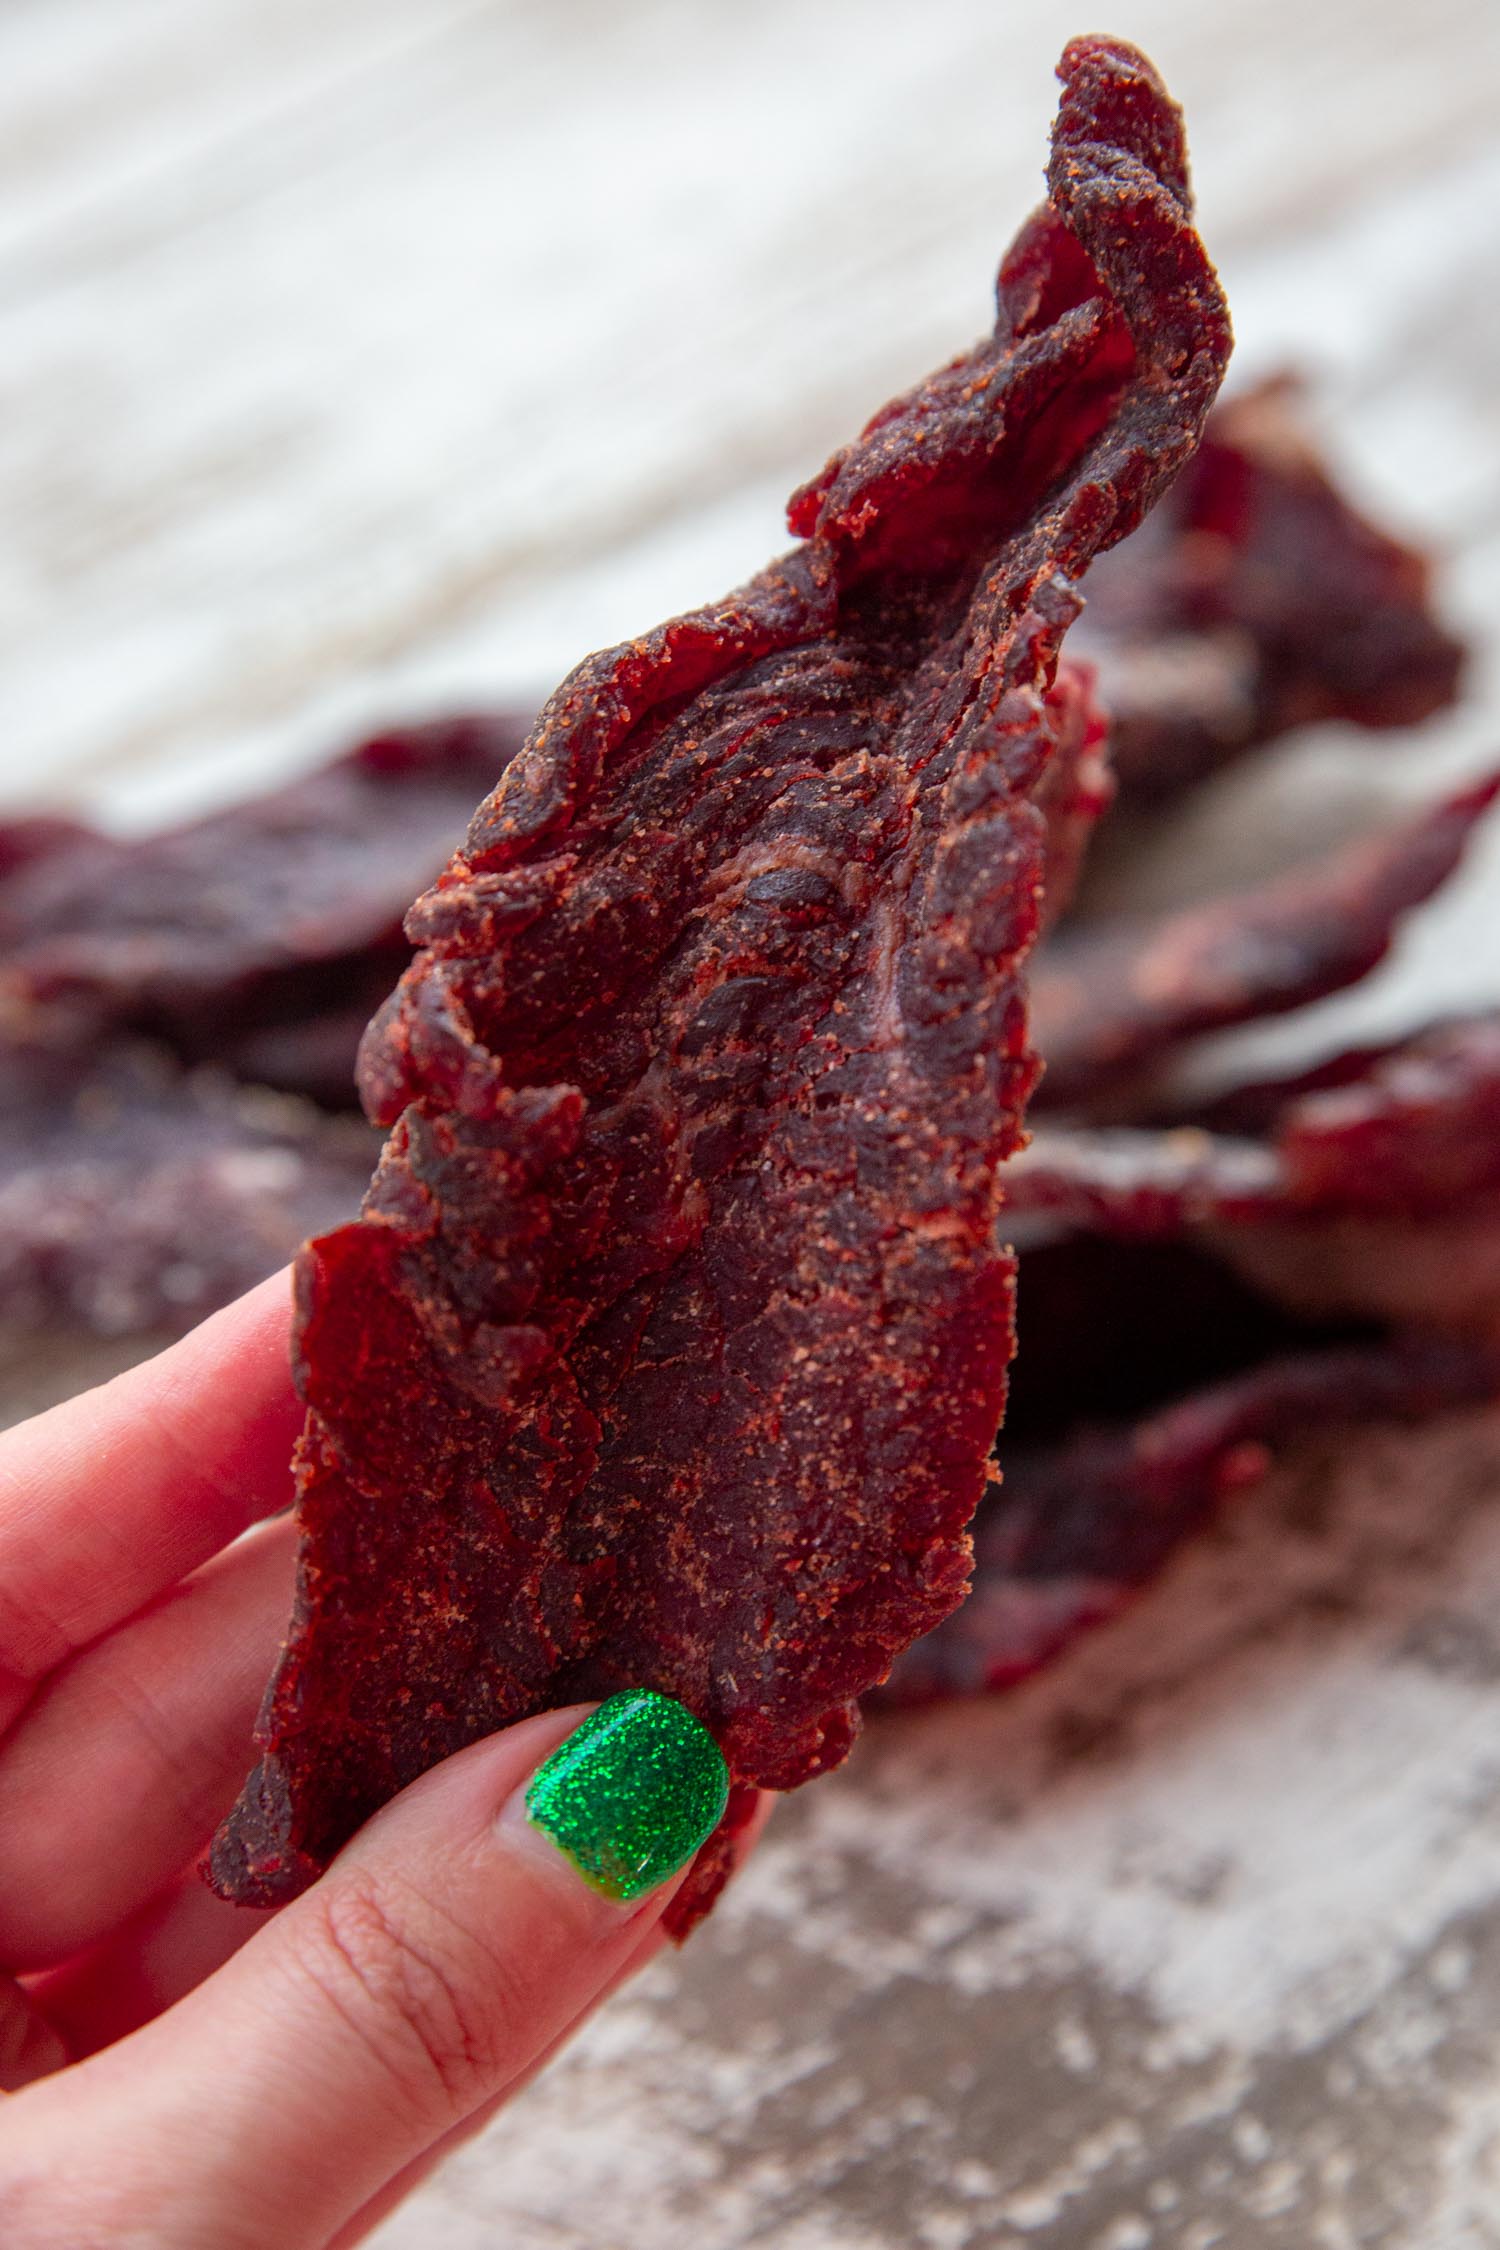 A hand holding up a piece of homemade beef jerky